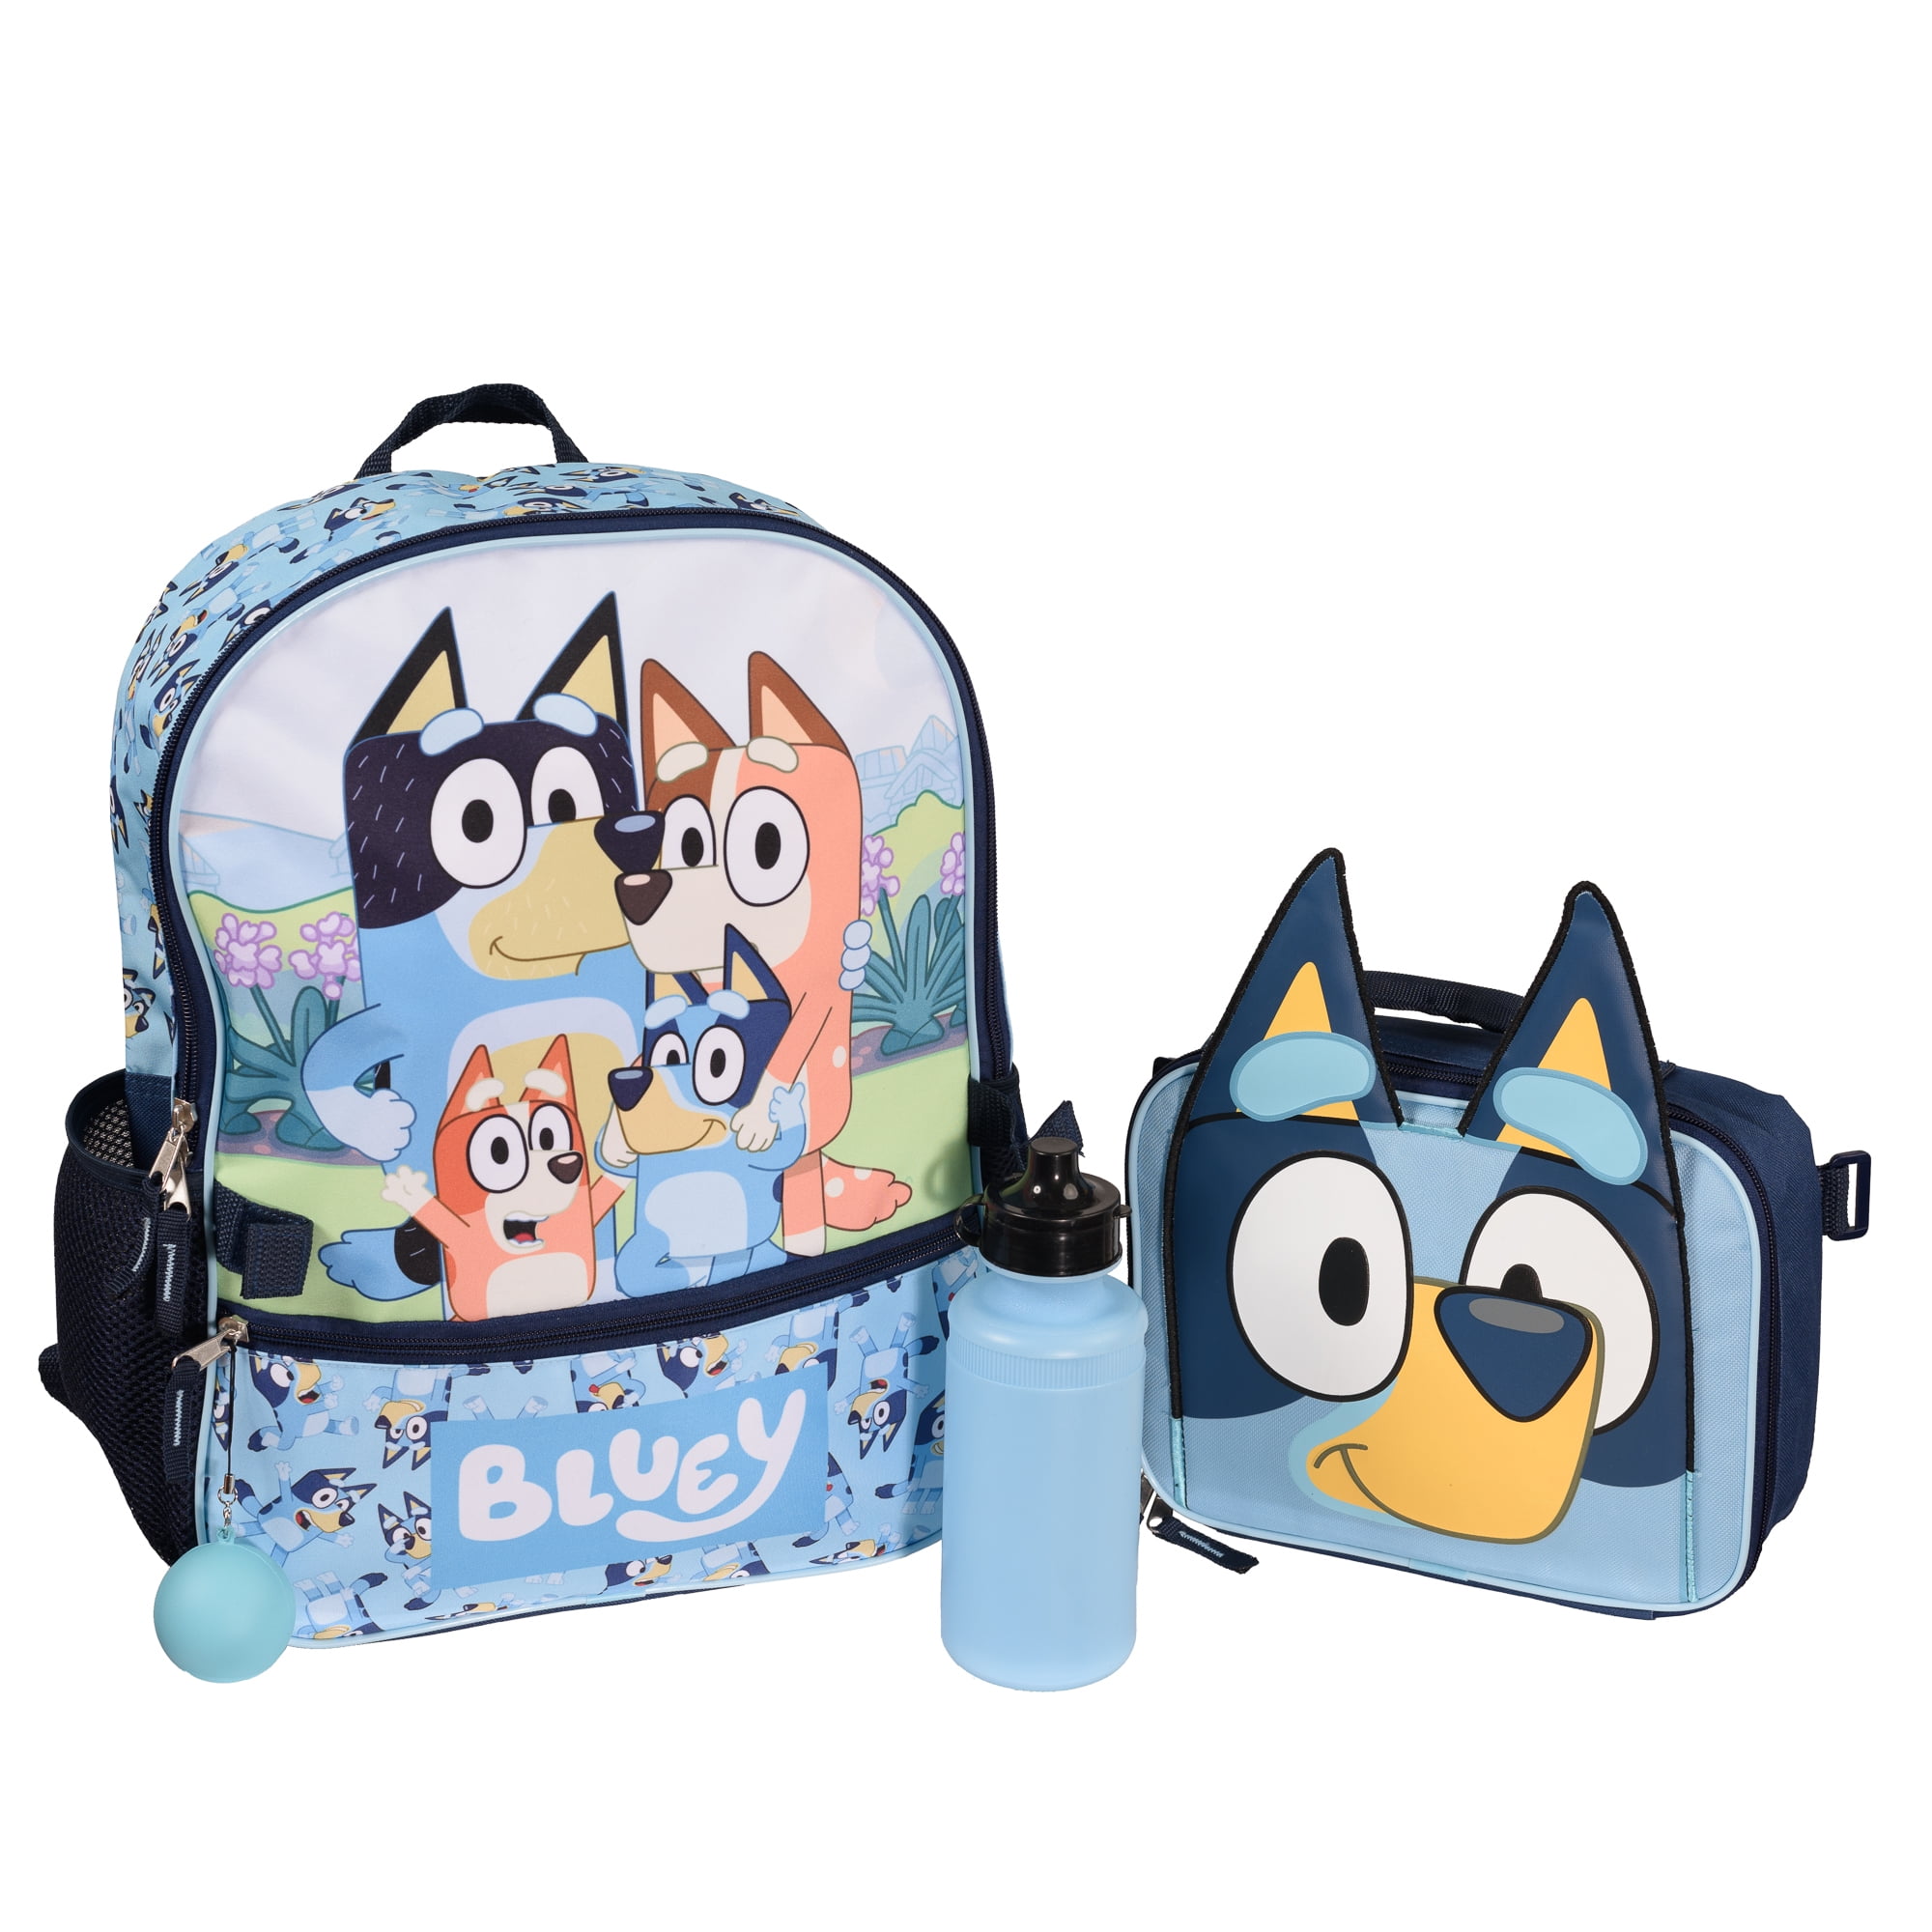 Frozen 16 inch Backpack 4-piece Set with lunch box for girls